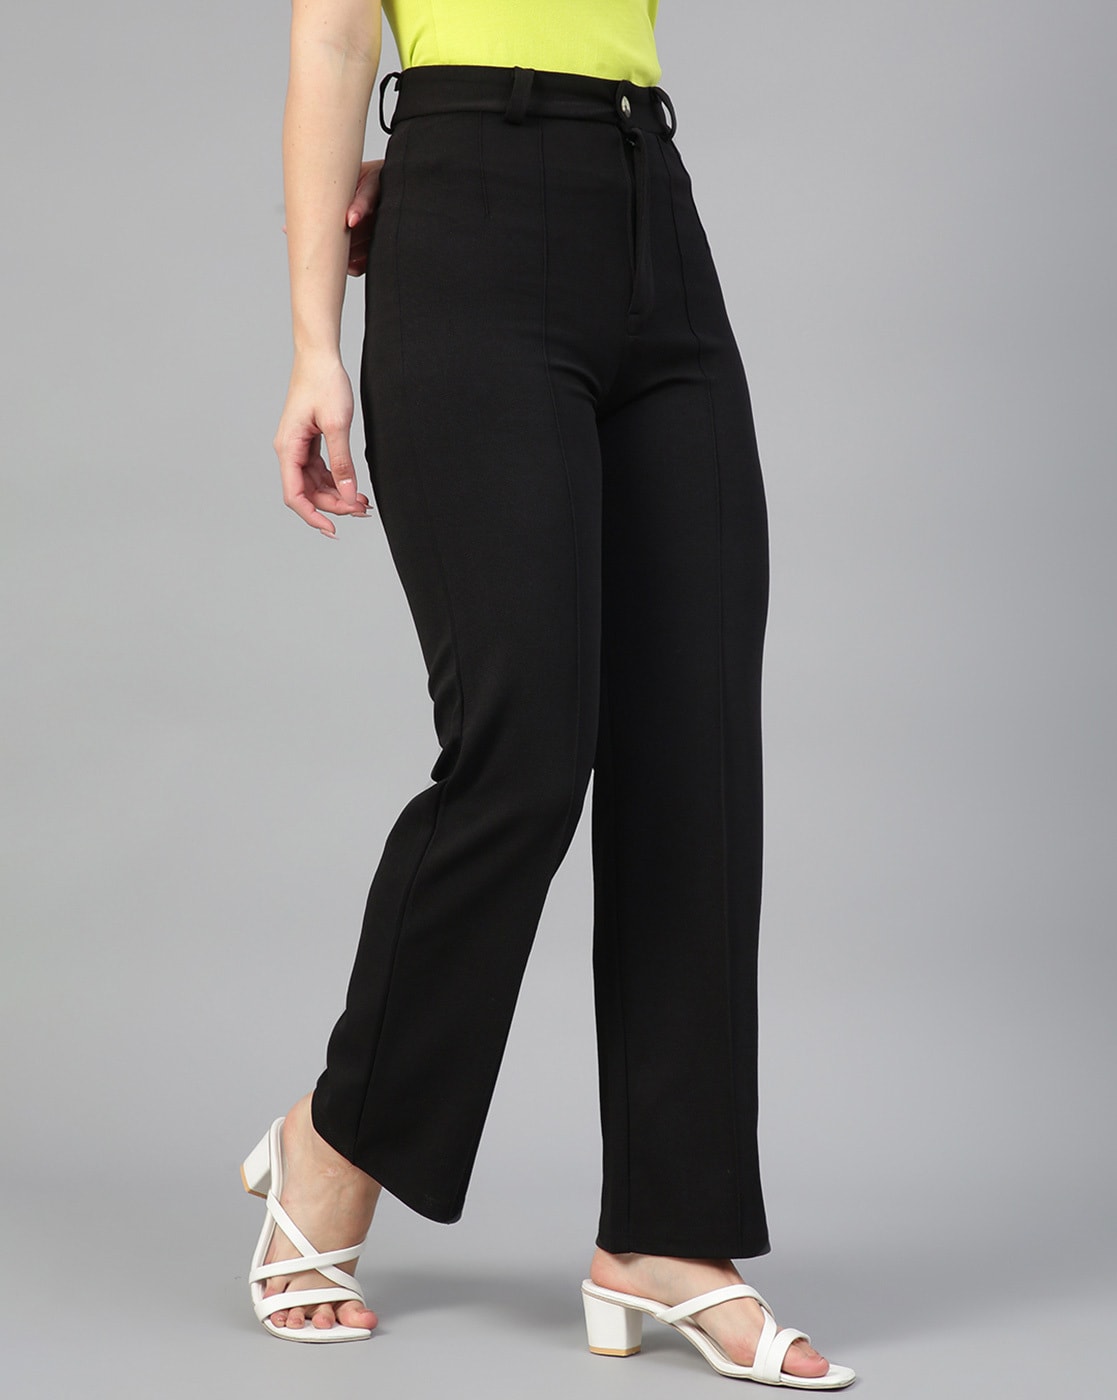 High-waisted tailored trousers - Black - Ladies | H&M